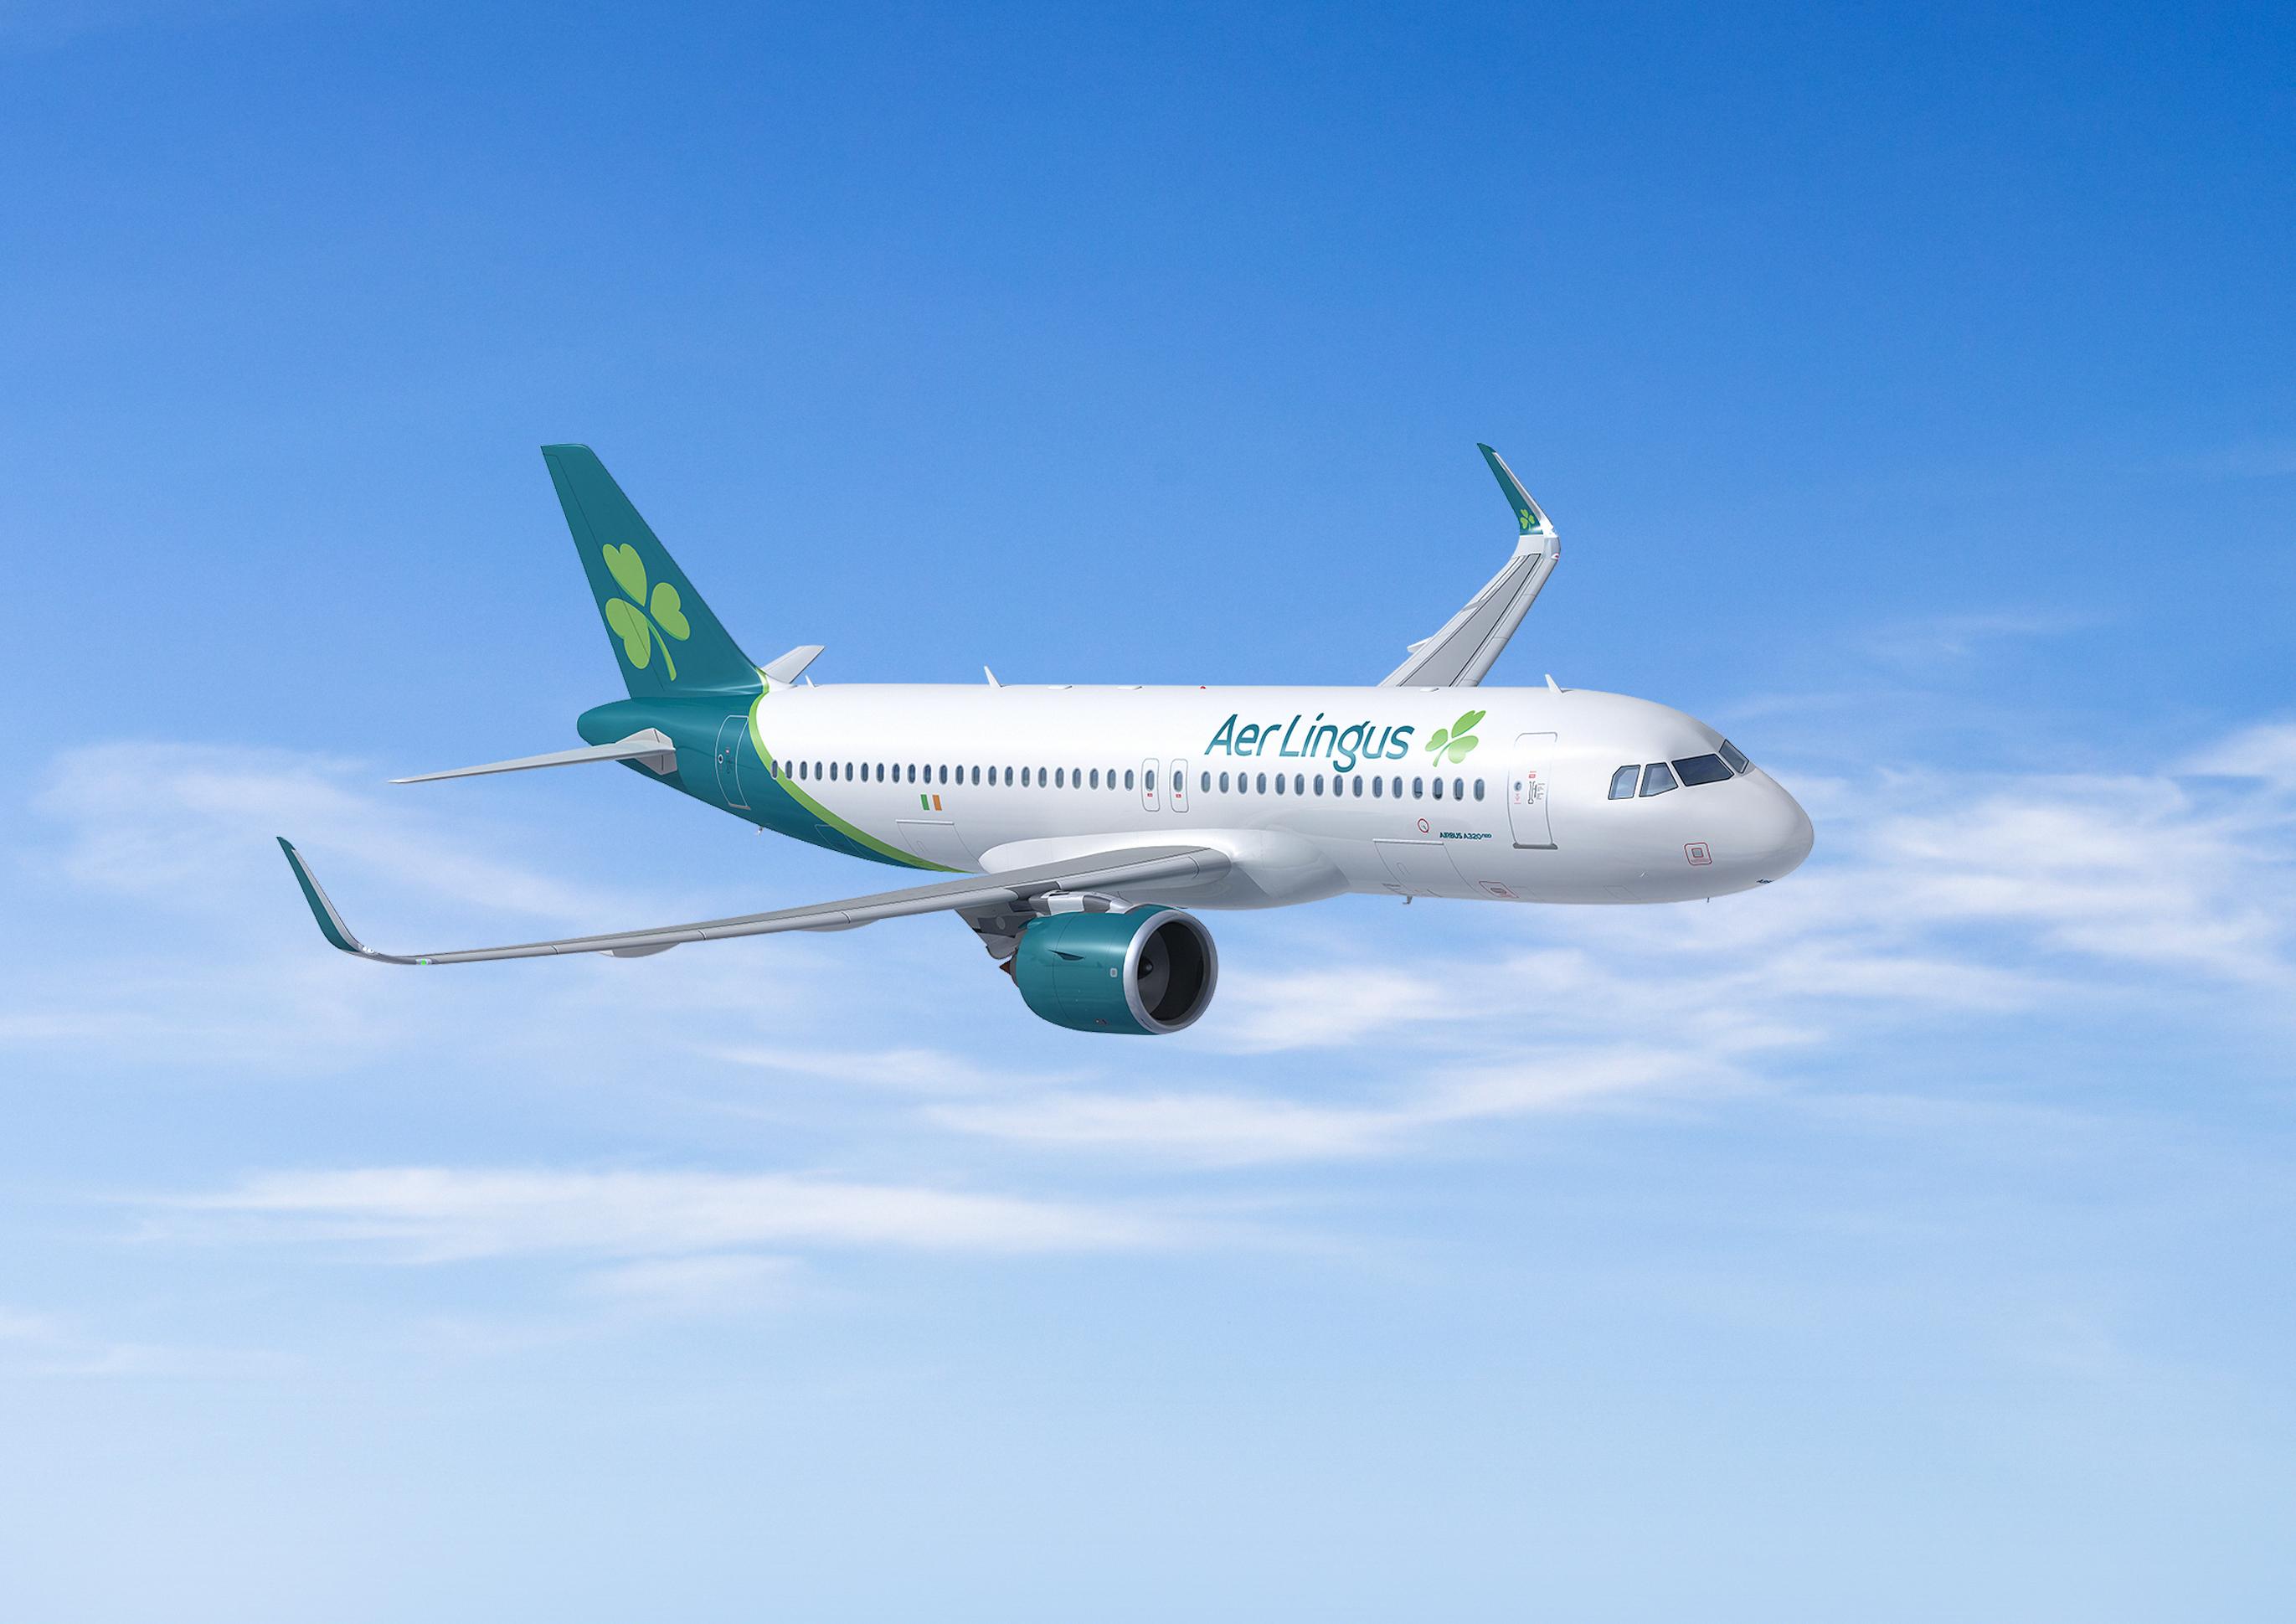 Aer Lingus signs deal for two next generation short haul aircraft